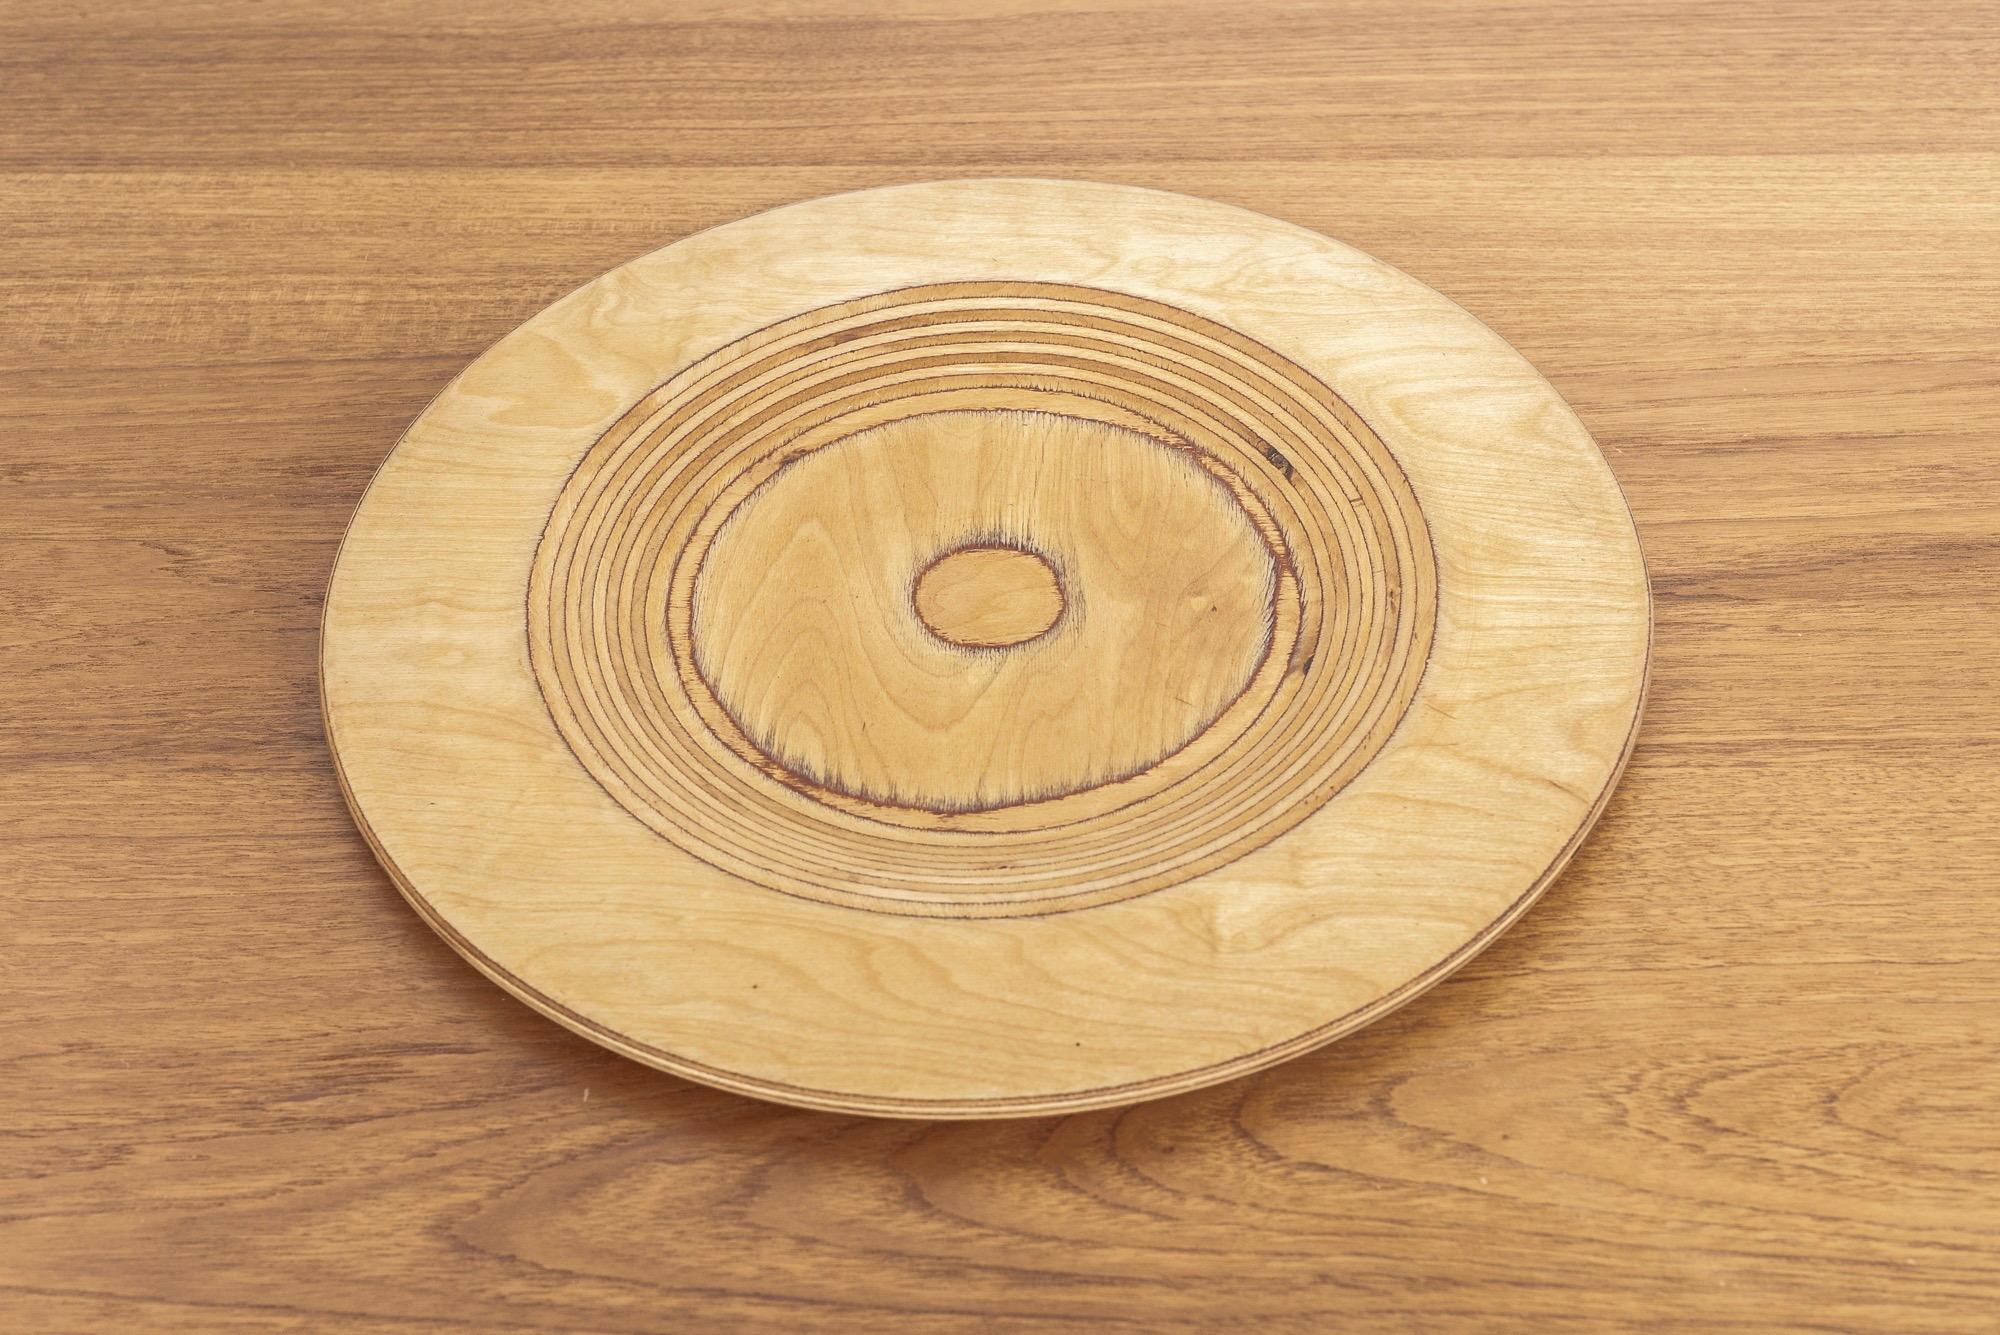 Listing is for one plate. Two smaller plates available separately.

This striking Mid-Century Modern wooden plate was designed by Saarinen and produced by Keuruu in Finland, circa 1960. The clean, Minimalist design crafted from turned birch